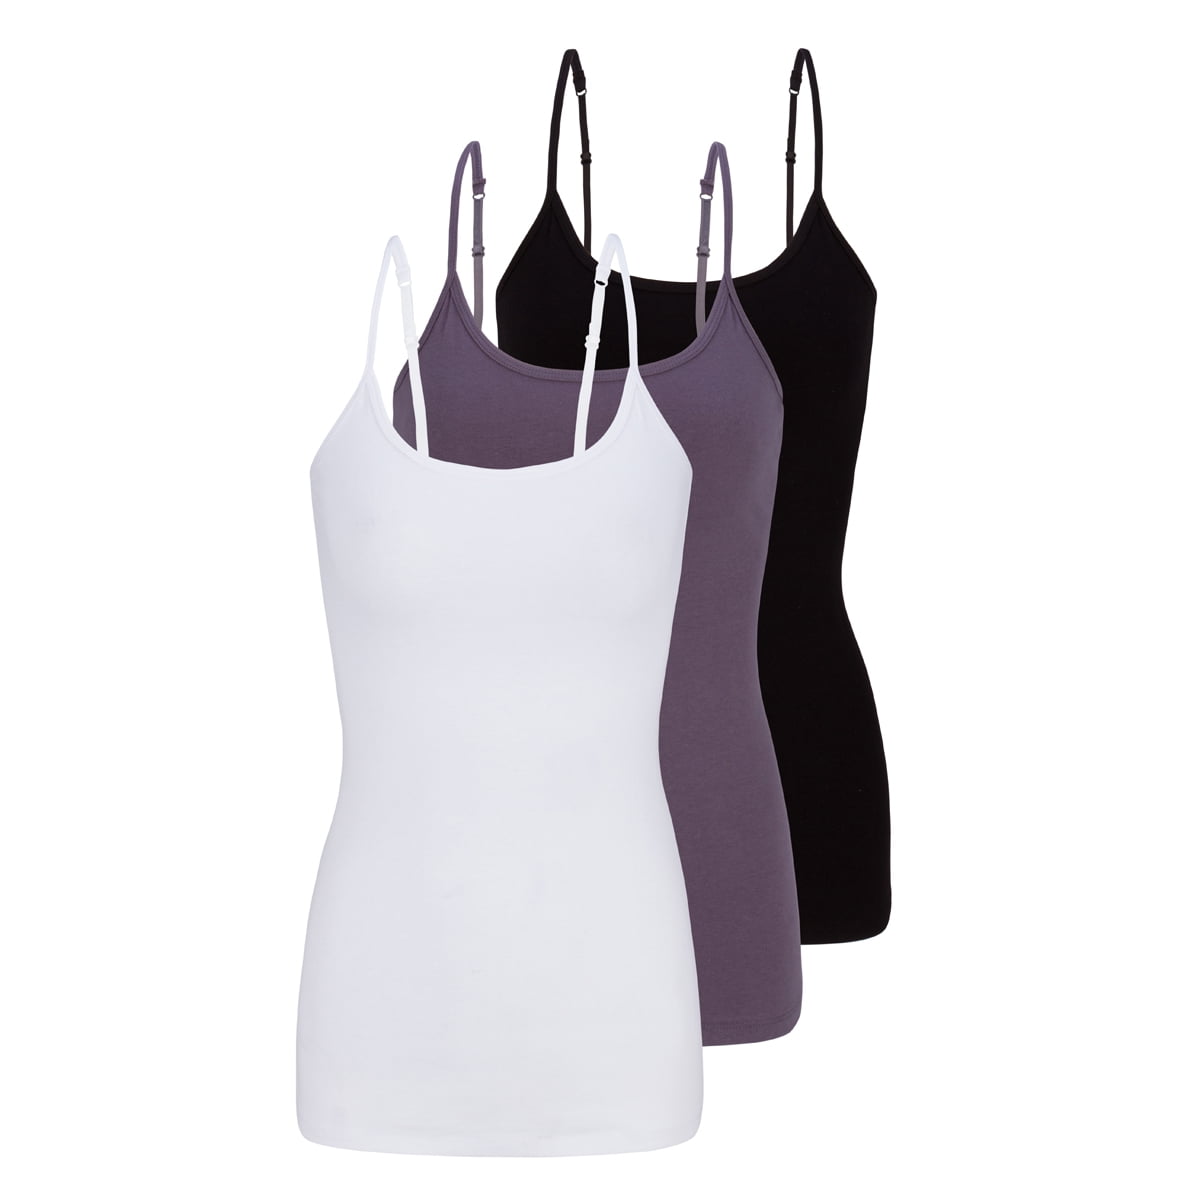 Natural Uniform Women's Camisole Cotton Stretch Slim-Fit Undershirt with  Adjustable Strap Tank Top Multi 3 Pack (White, Black, White) X-Large 